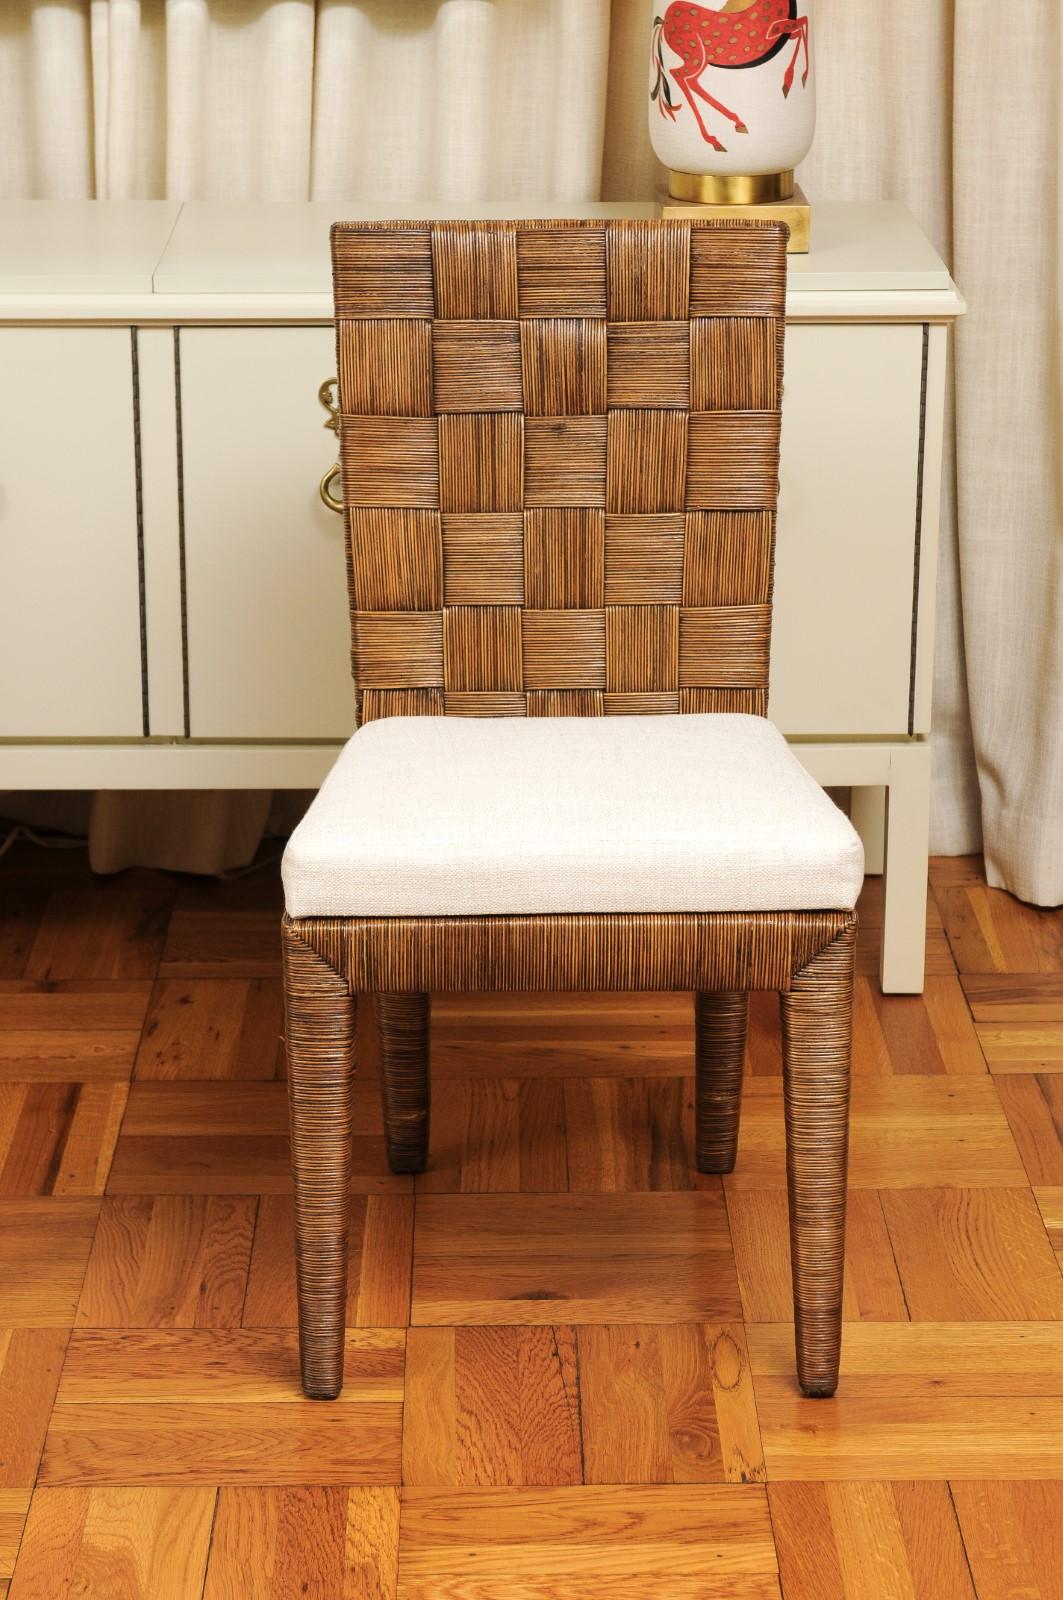 Stellar Restored Set of 8 Block Island Cane Chairs by John Hutton for Donghia In Excellent Condition For Sale In Atlanta, GA